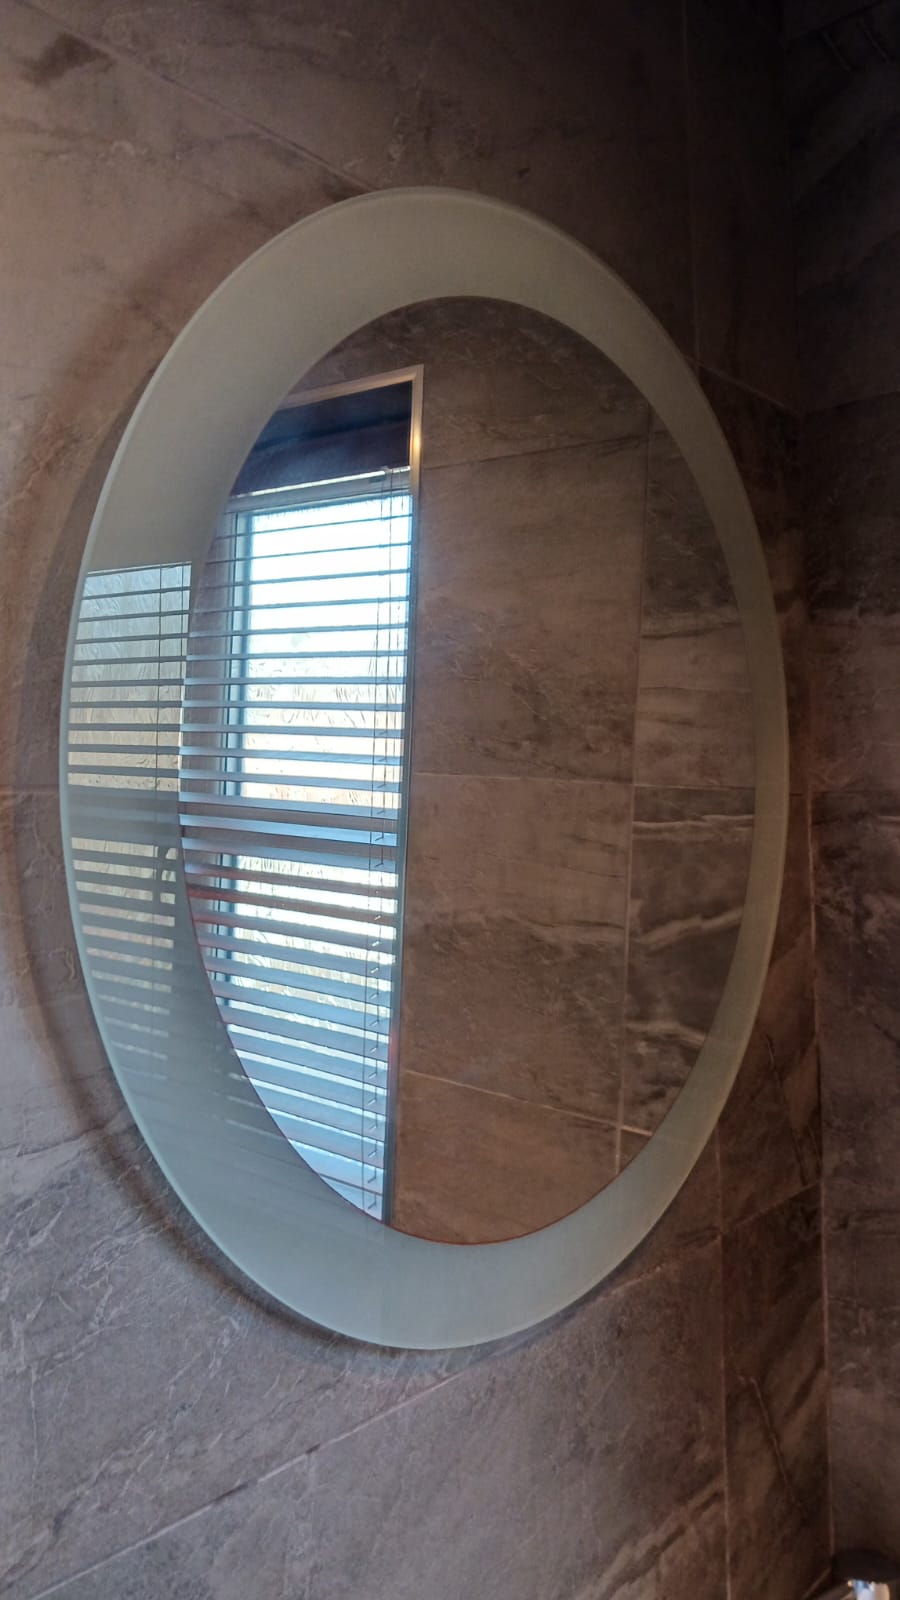 A 60cm diameter circular bathroom mirror. The mirror appears to be in Excellent condition.